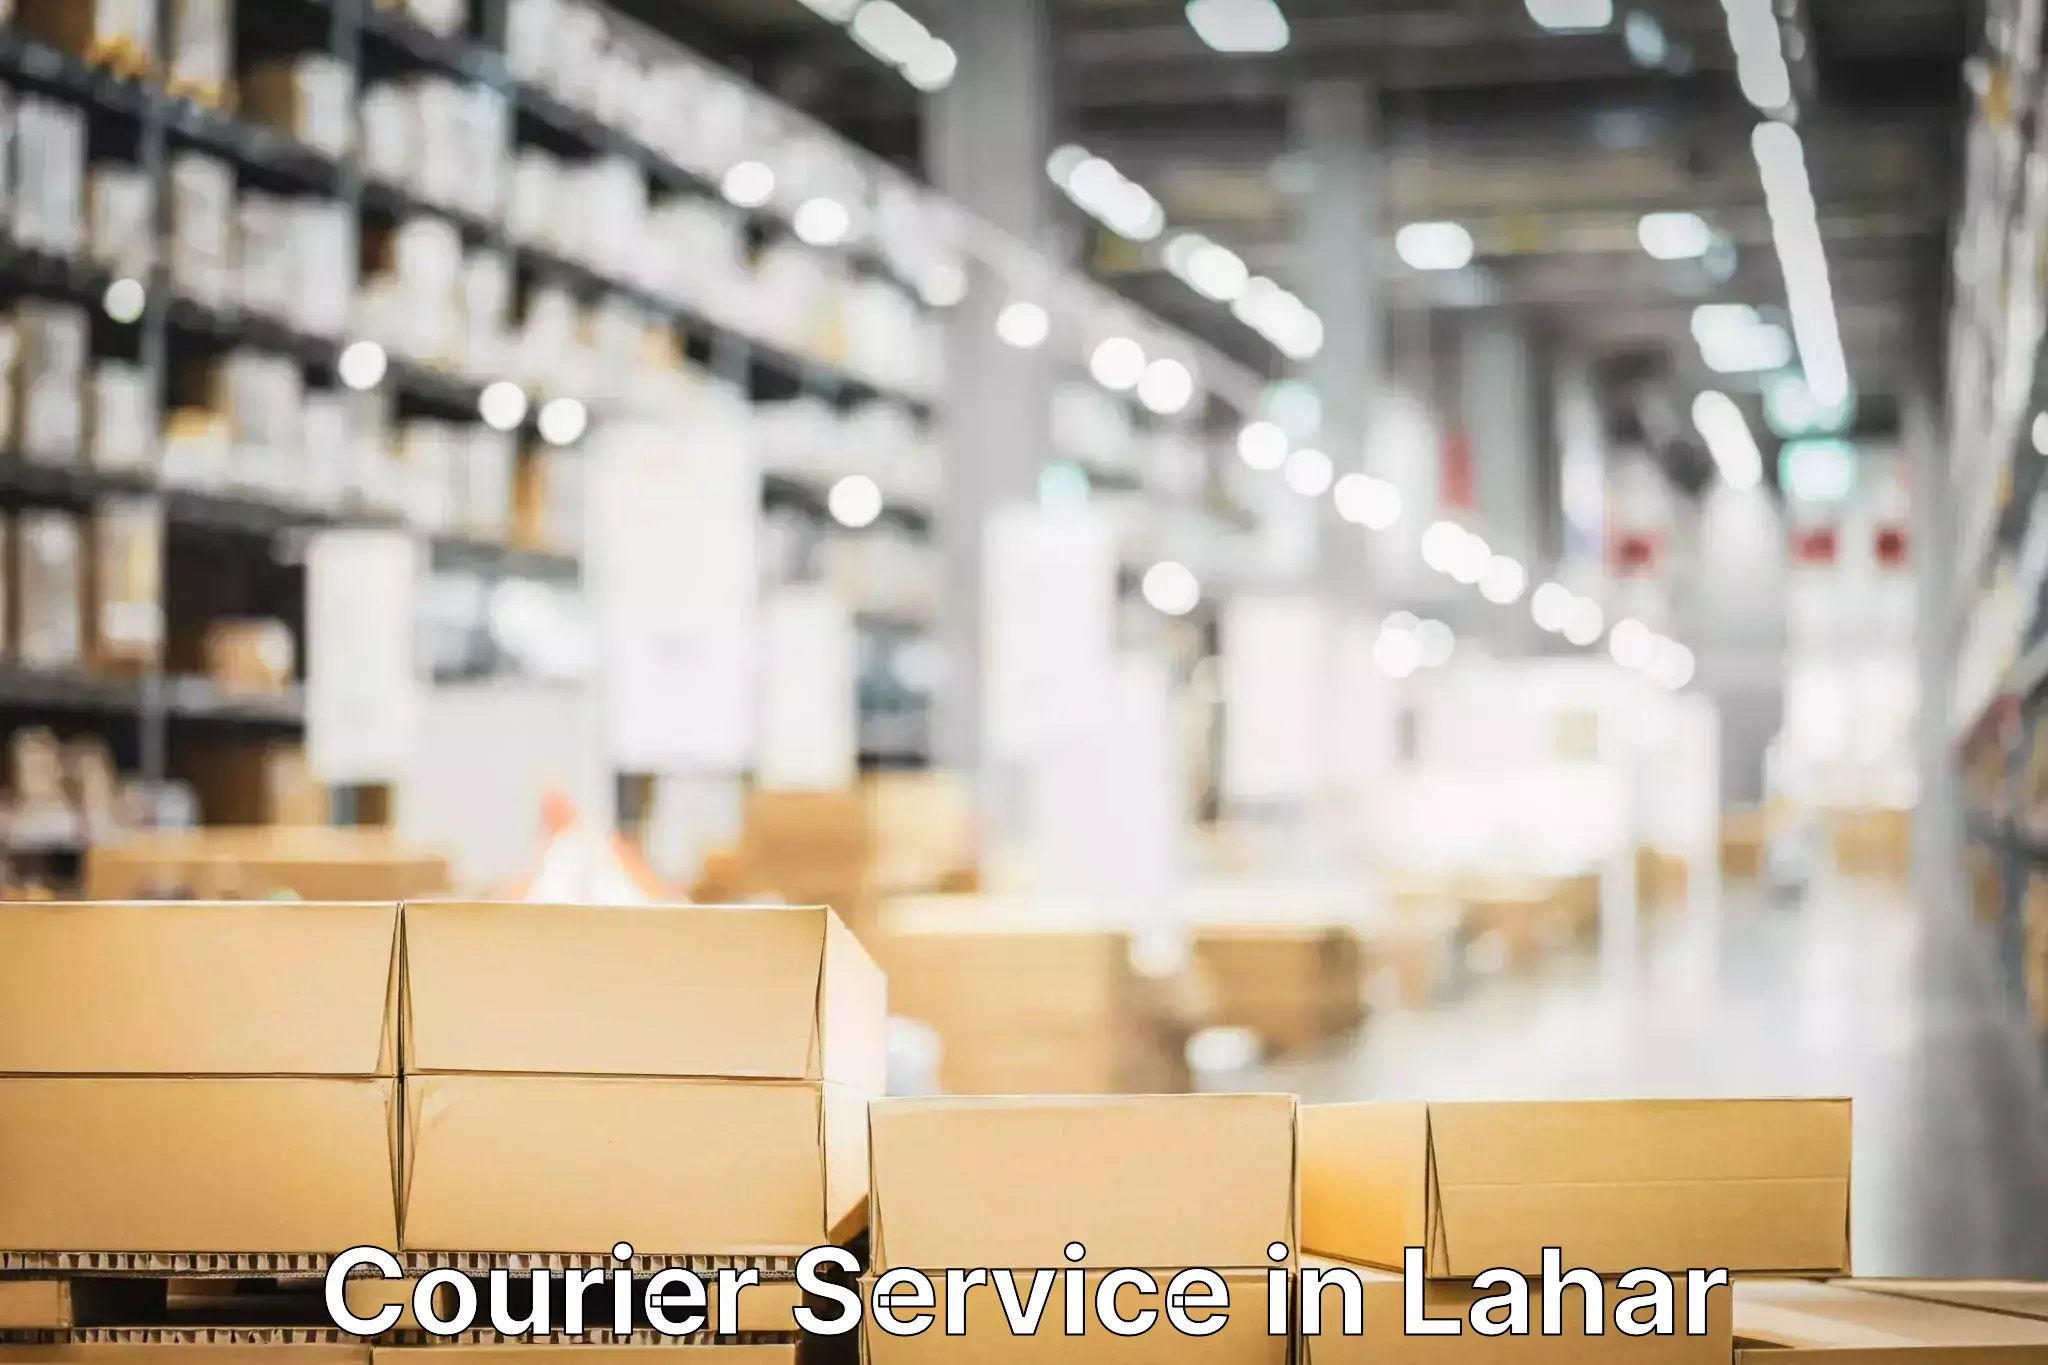 Rapid shipping services in Lahar